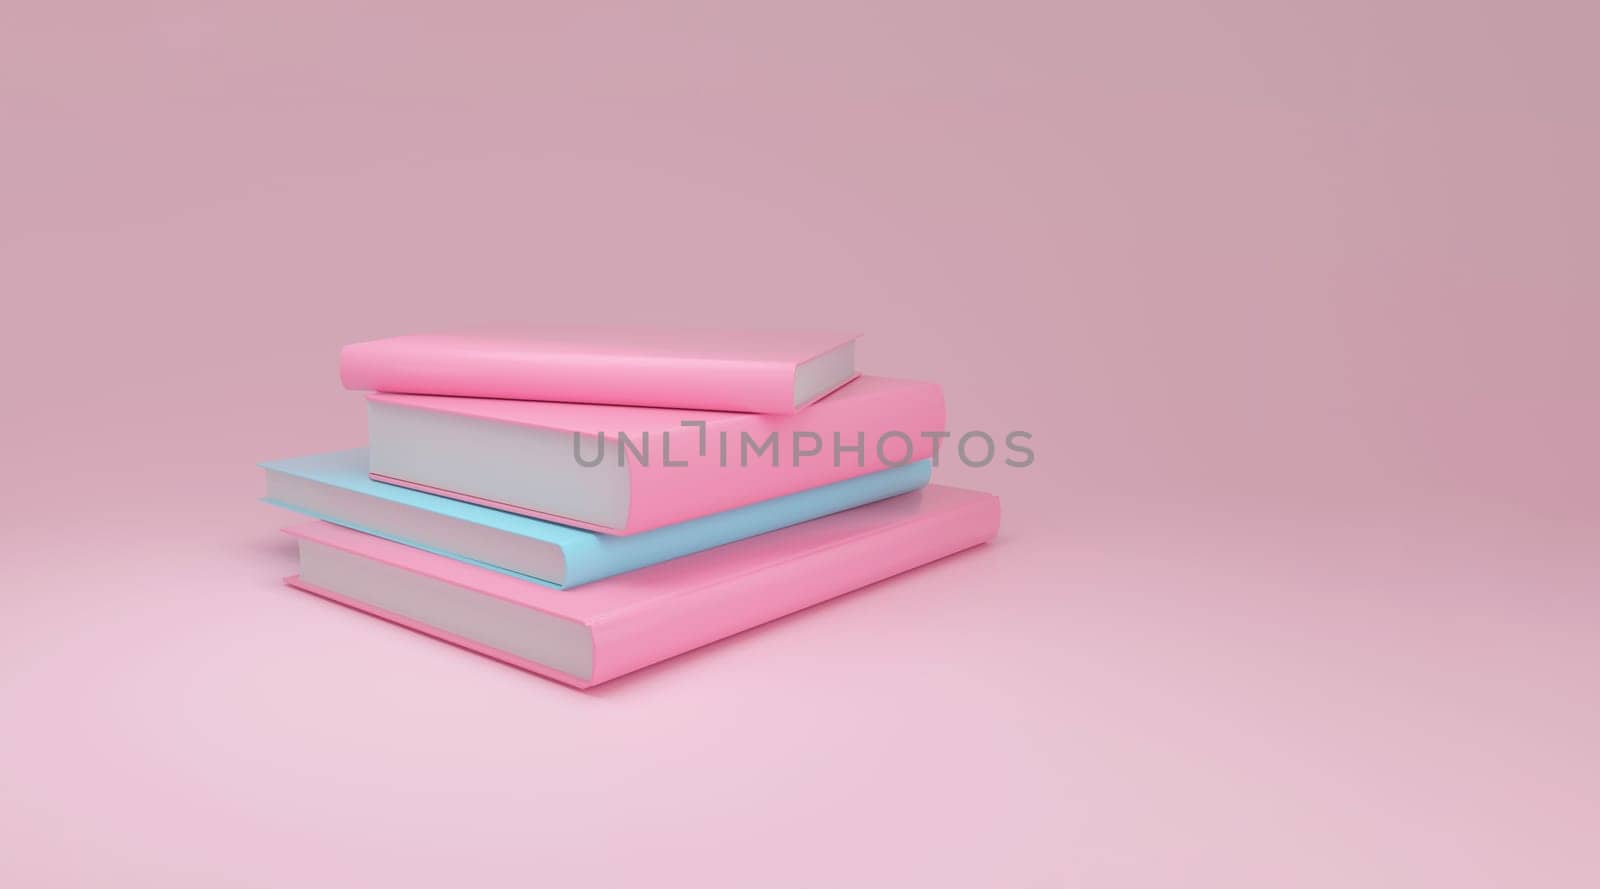 Pastel Pink and Blue Book Stack on Pink Background. Book Day concept. by ImagesRouges